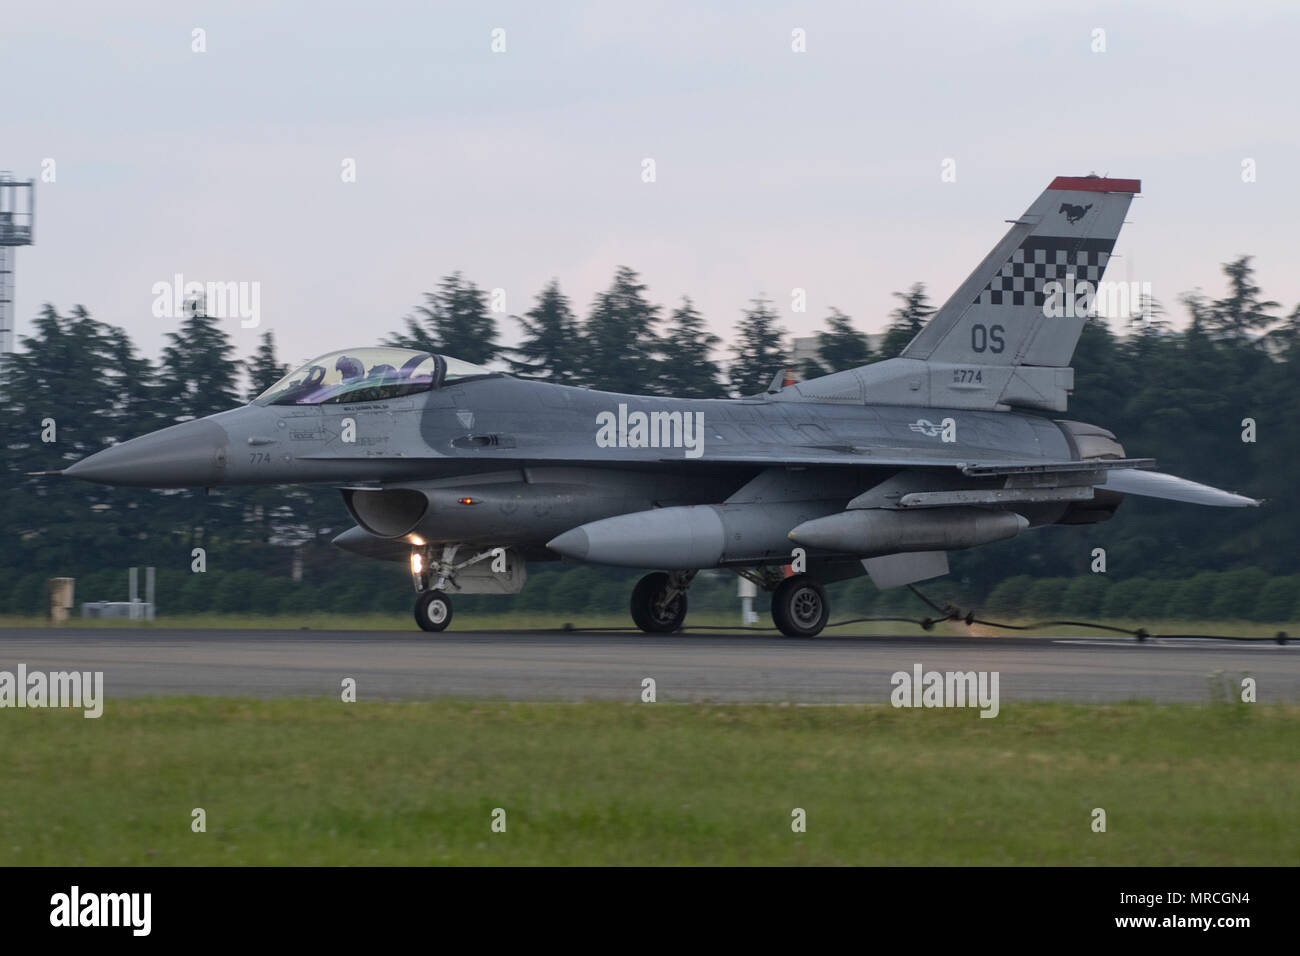 An F-16 Fighting falcon assigned to the 36th Fighter Squadron, Osan Air Base, engages a barrier during an annual certification test of the Aircraft Arresting System at Yokota Air Base, Japan, June 1, 2017. Airmen from the 374 CES and 374th Operations Support Squadron are responsible for setting up the system and logging any deficiencies during the test. (U.S. Air Force photo by Yasuo Osakabe) Stock Photo